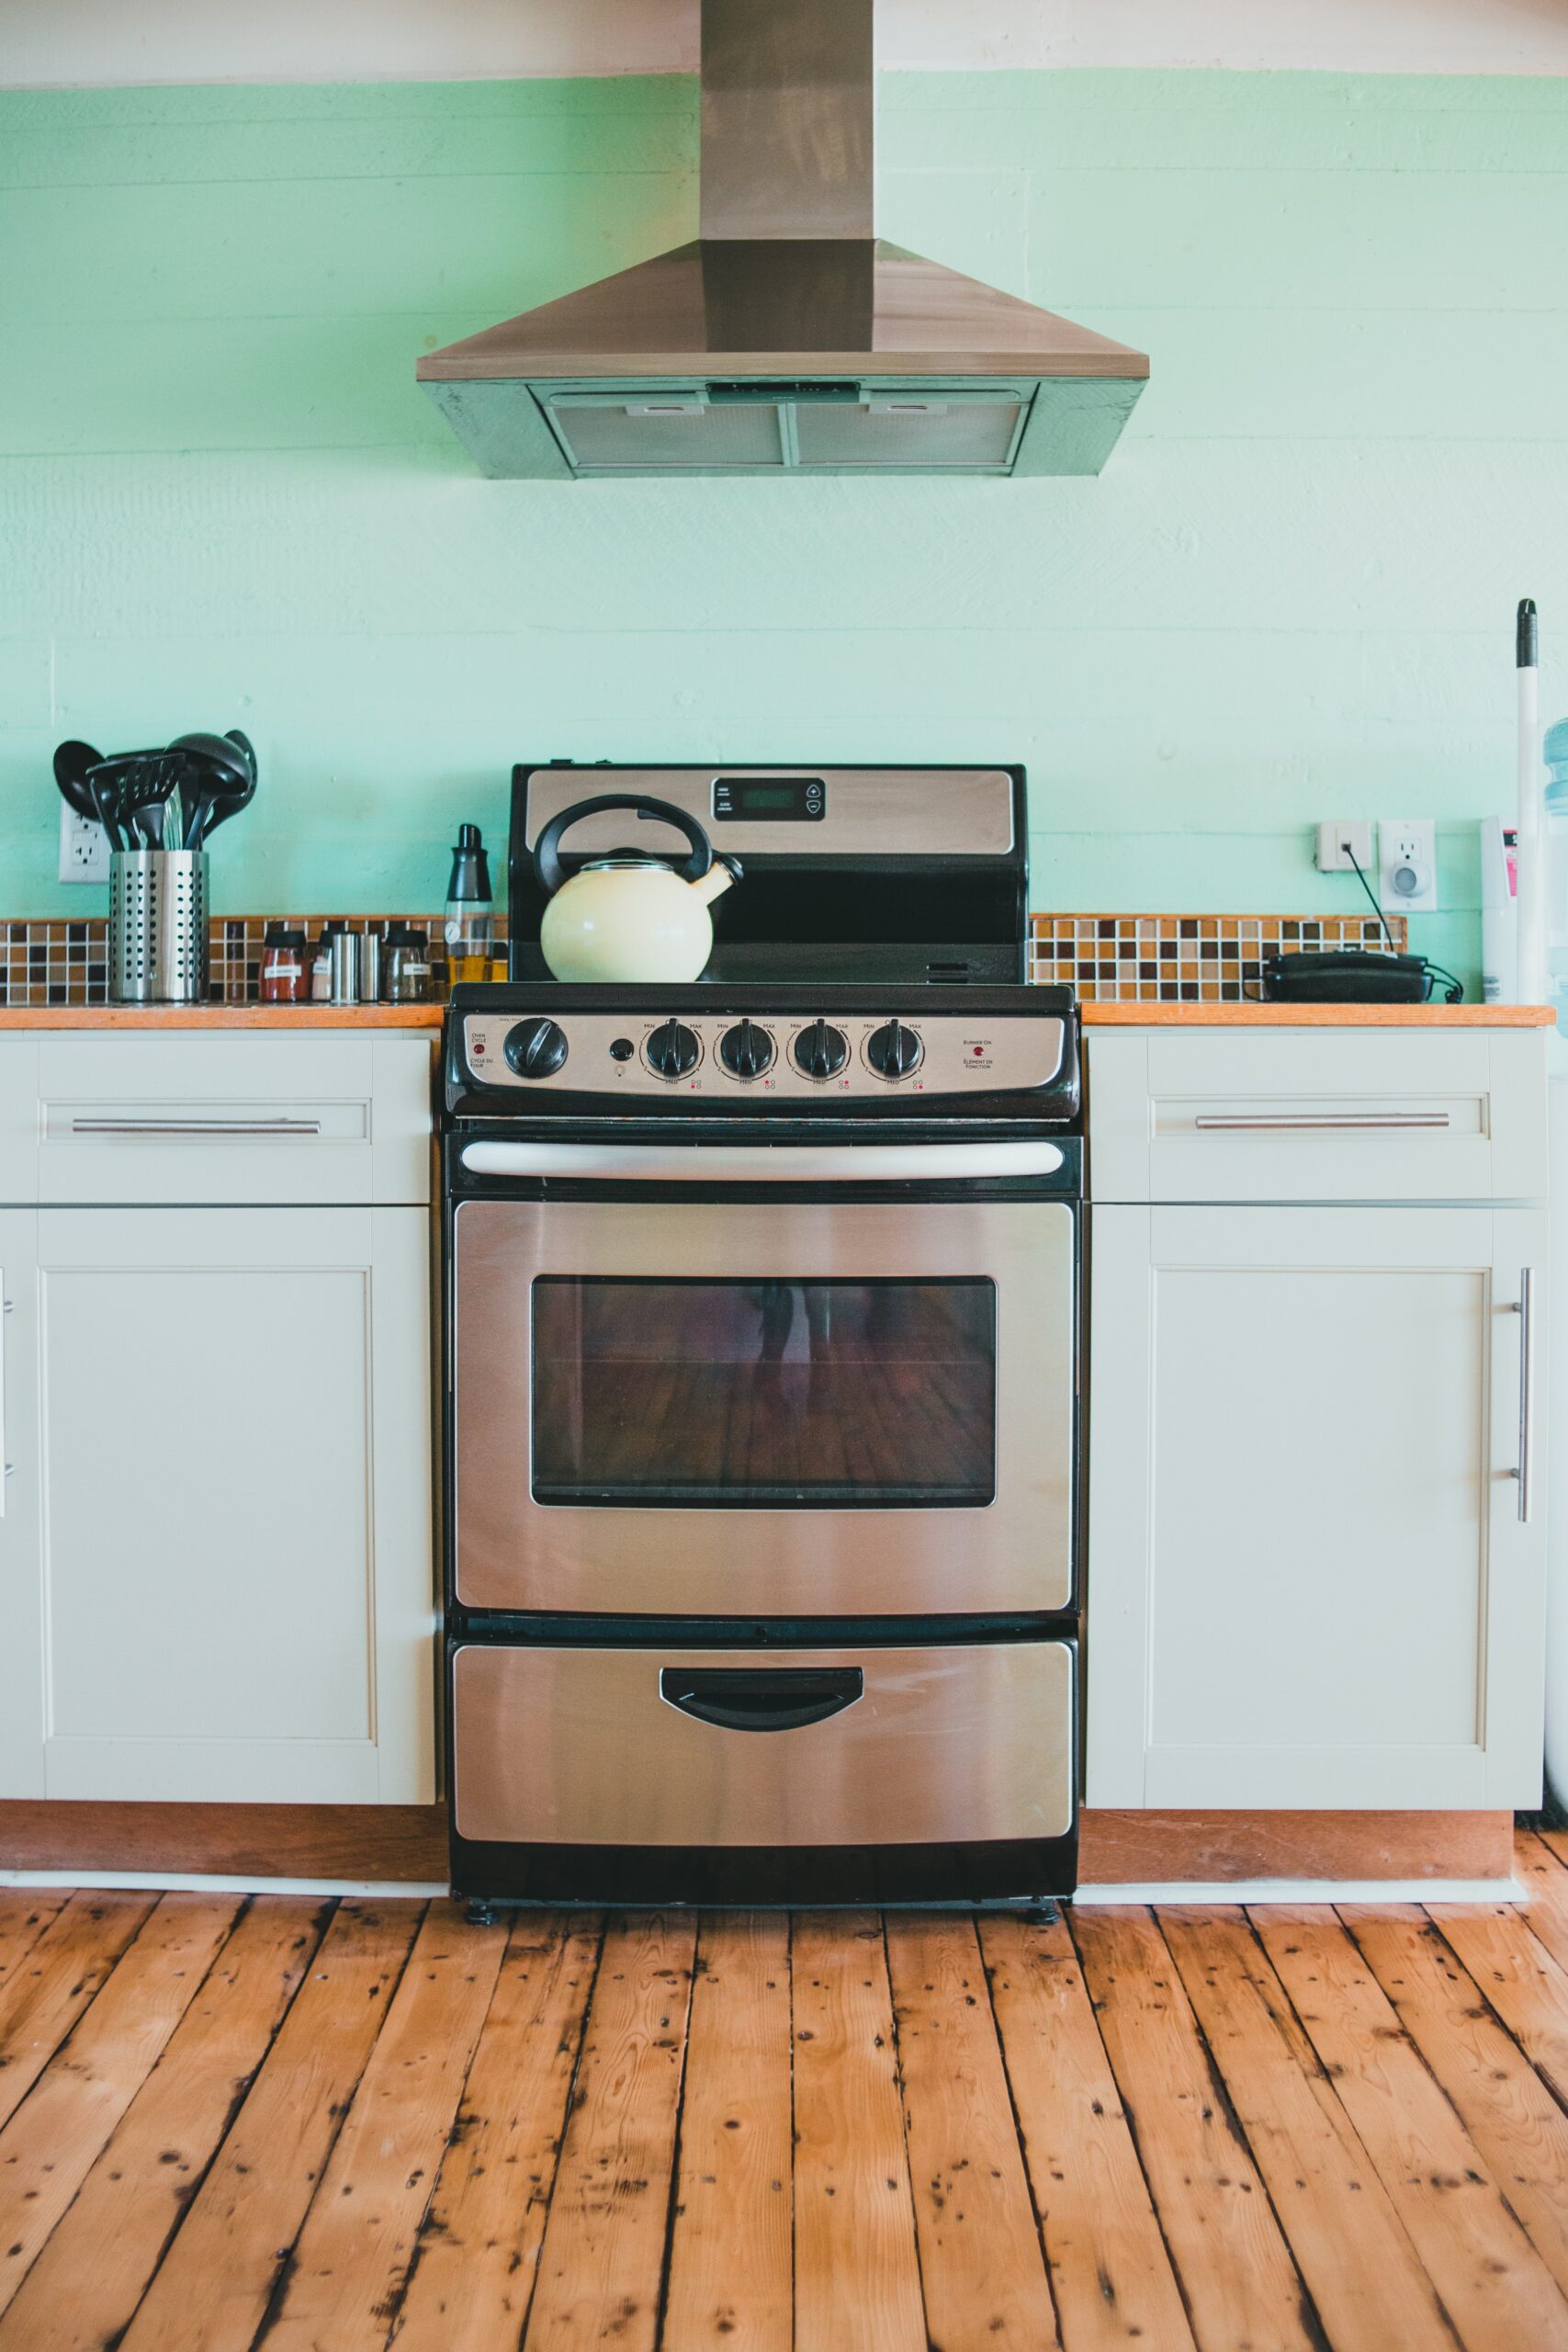 An oven in your home that's a little outdated